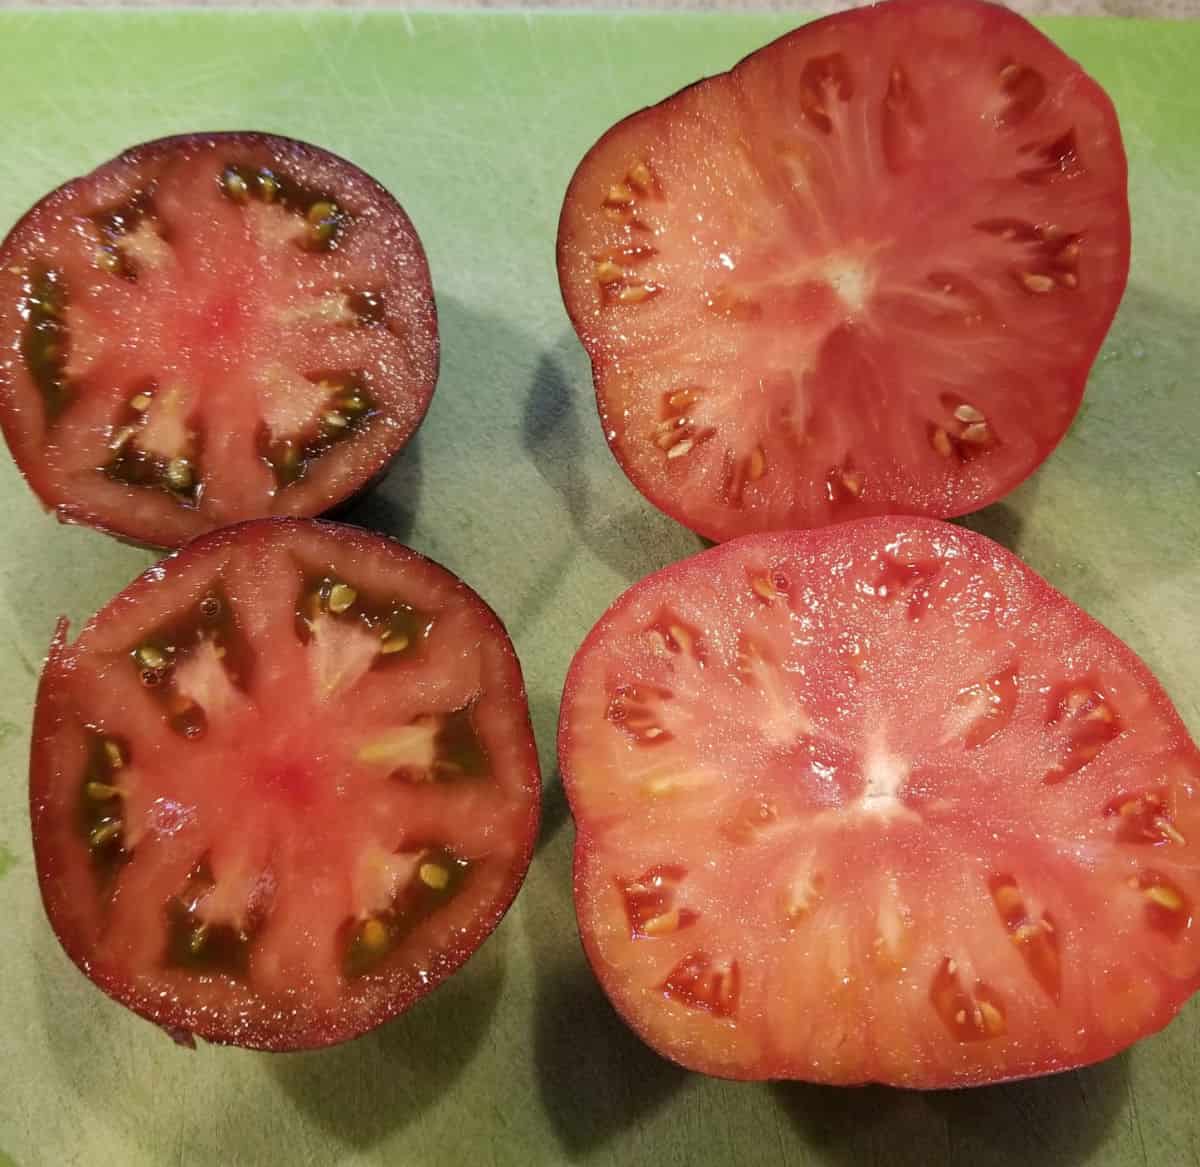 sliced open black and blue beauty tomatoes showing the color of the flesh inside